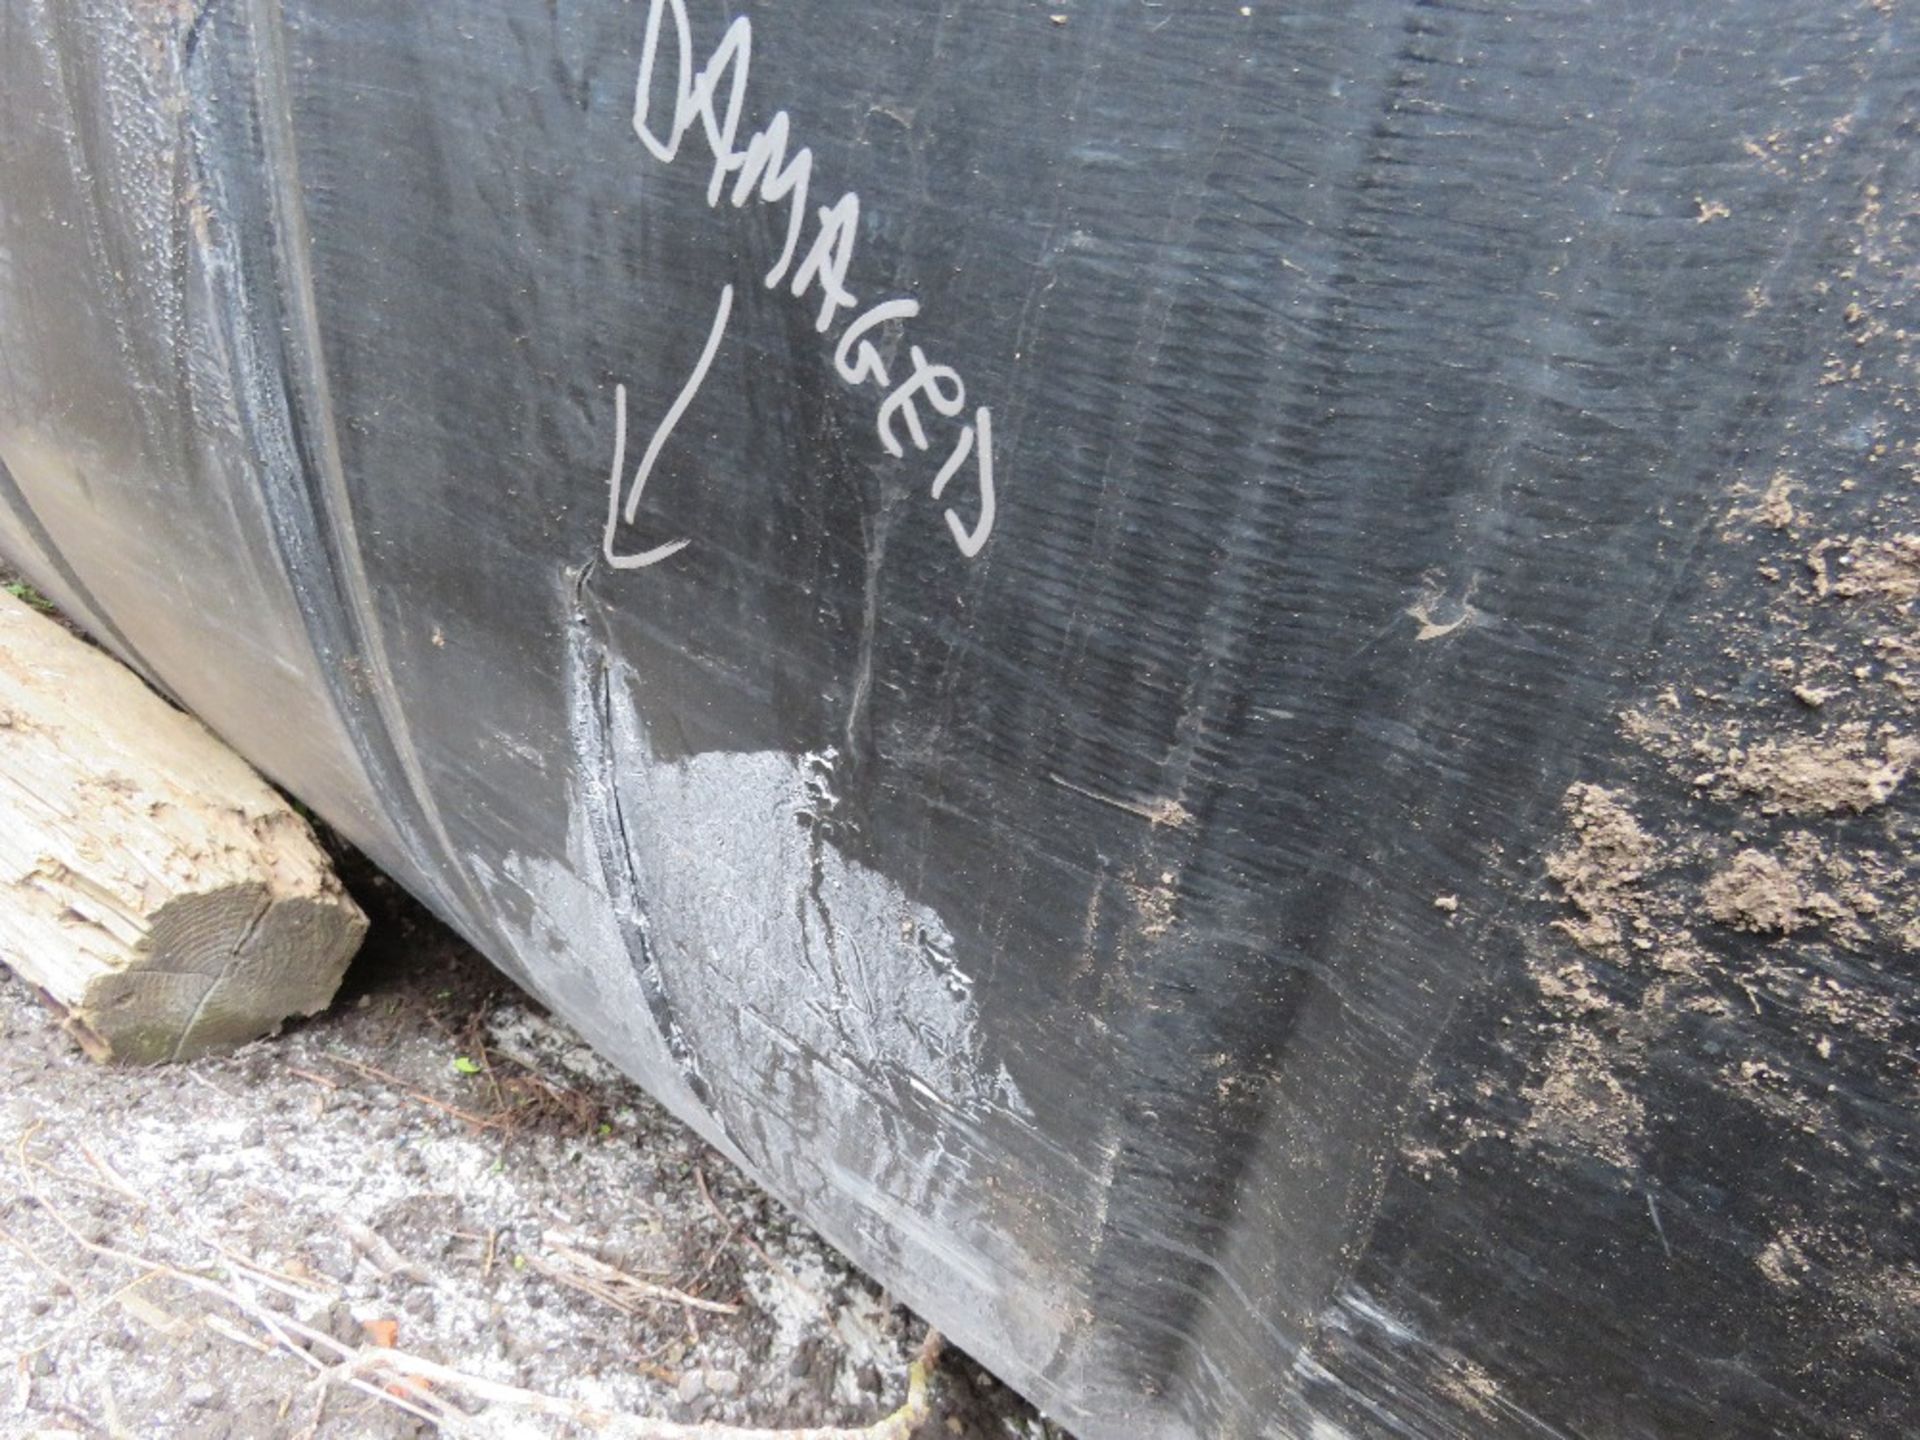 EXTRA LARGE WATER STORAGE TANK 10FT HEIGHT X 9FT DIAMETER APPROX. DAMAGED IN THE MIDDLE AS SHOWN. EX - Image 9 of 10